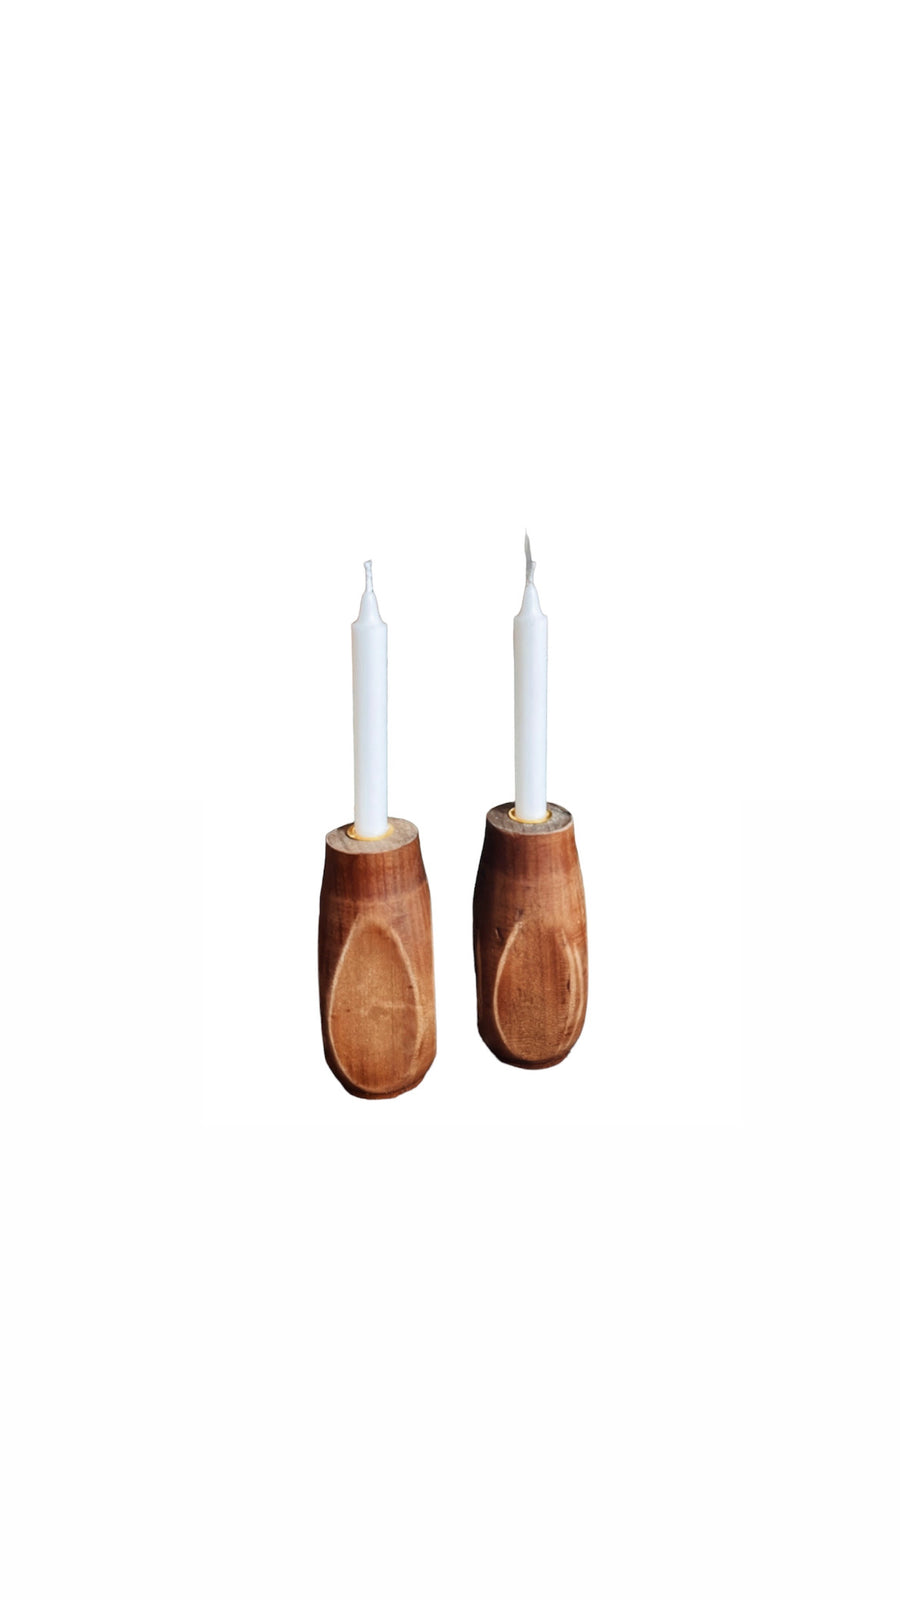 Wooden Candlestick Holders (Mini)